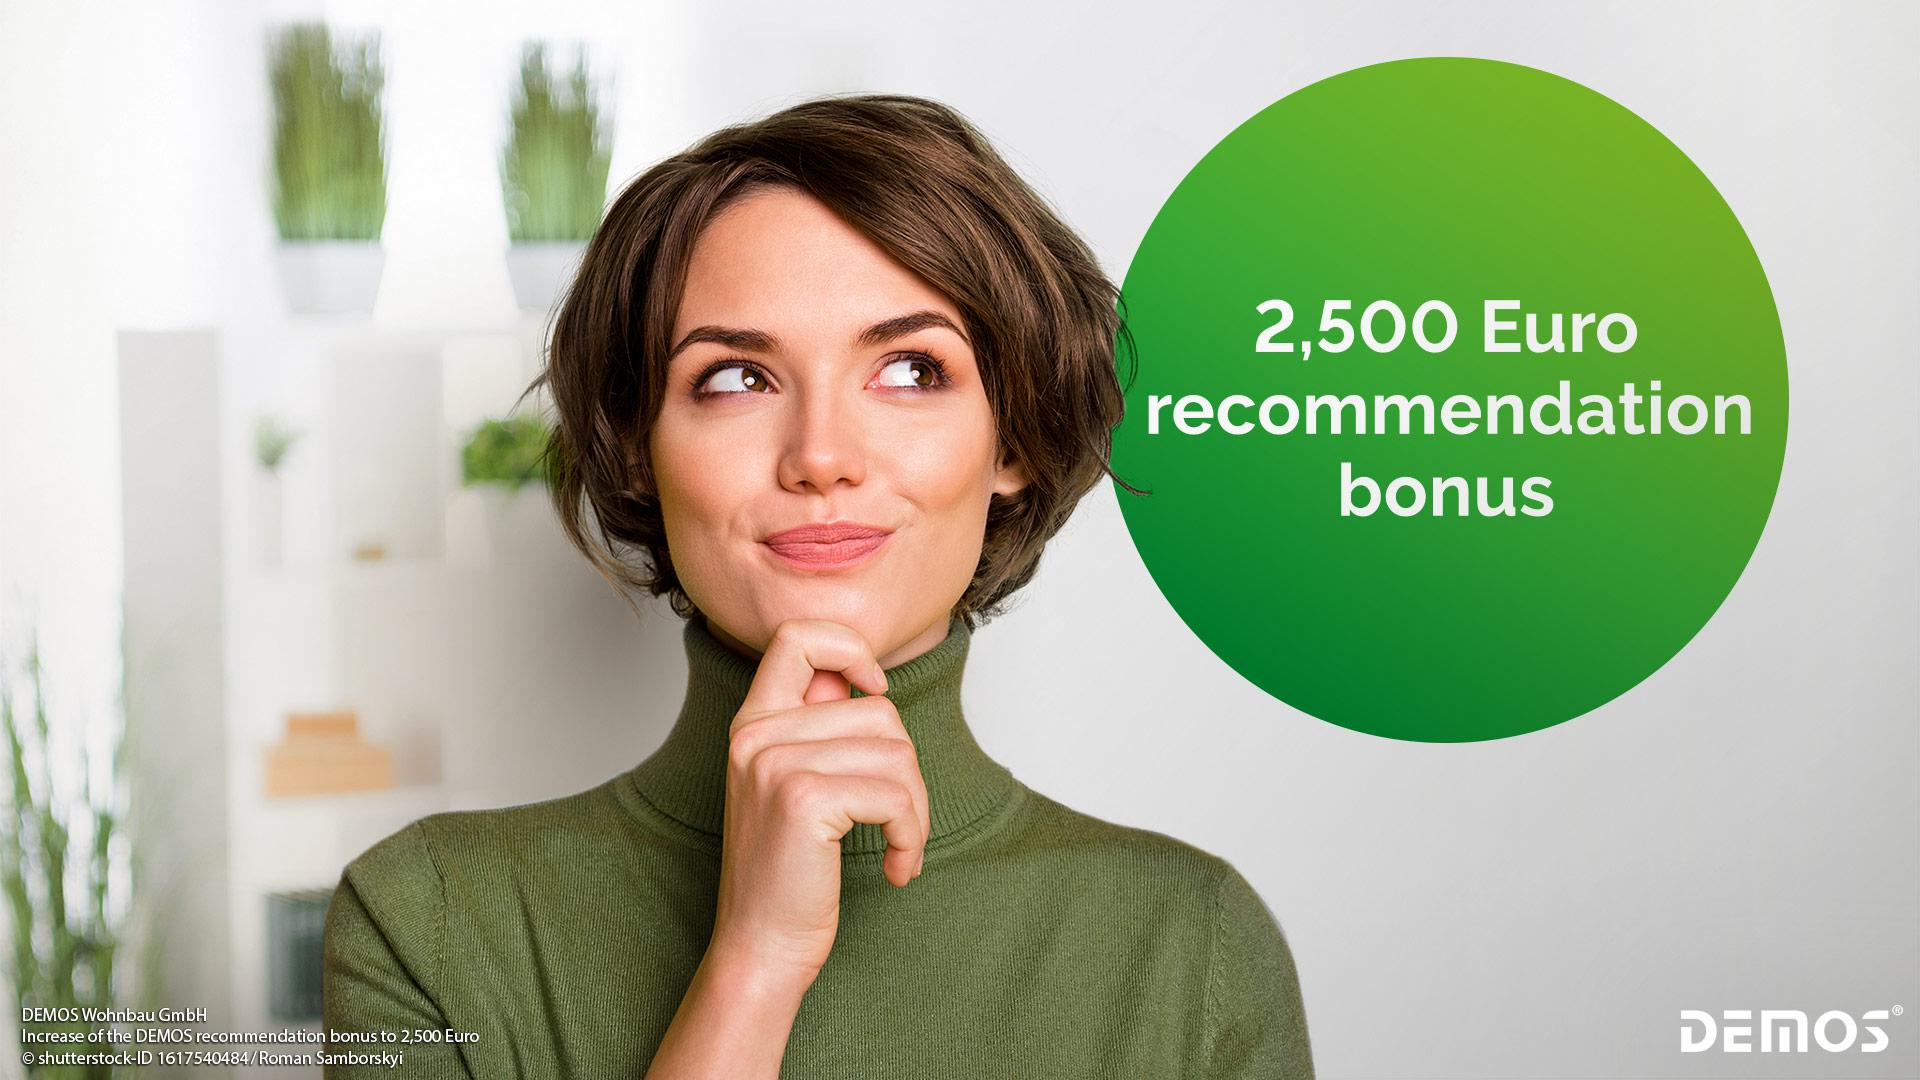 We say thank you: Increase of the DEMOS recommendation bonus to 2,500 Euro